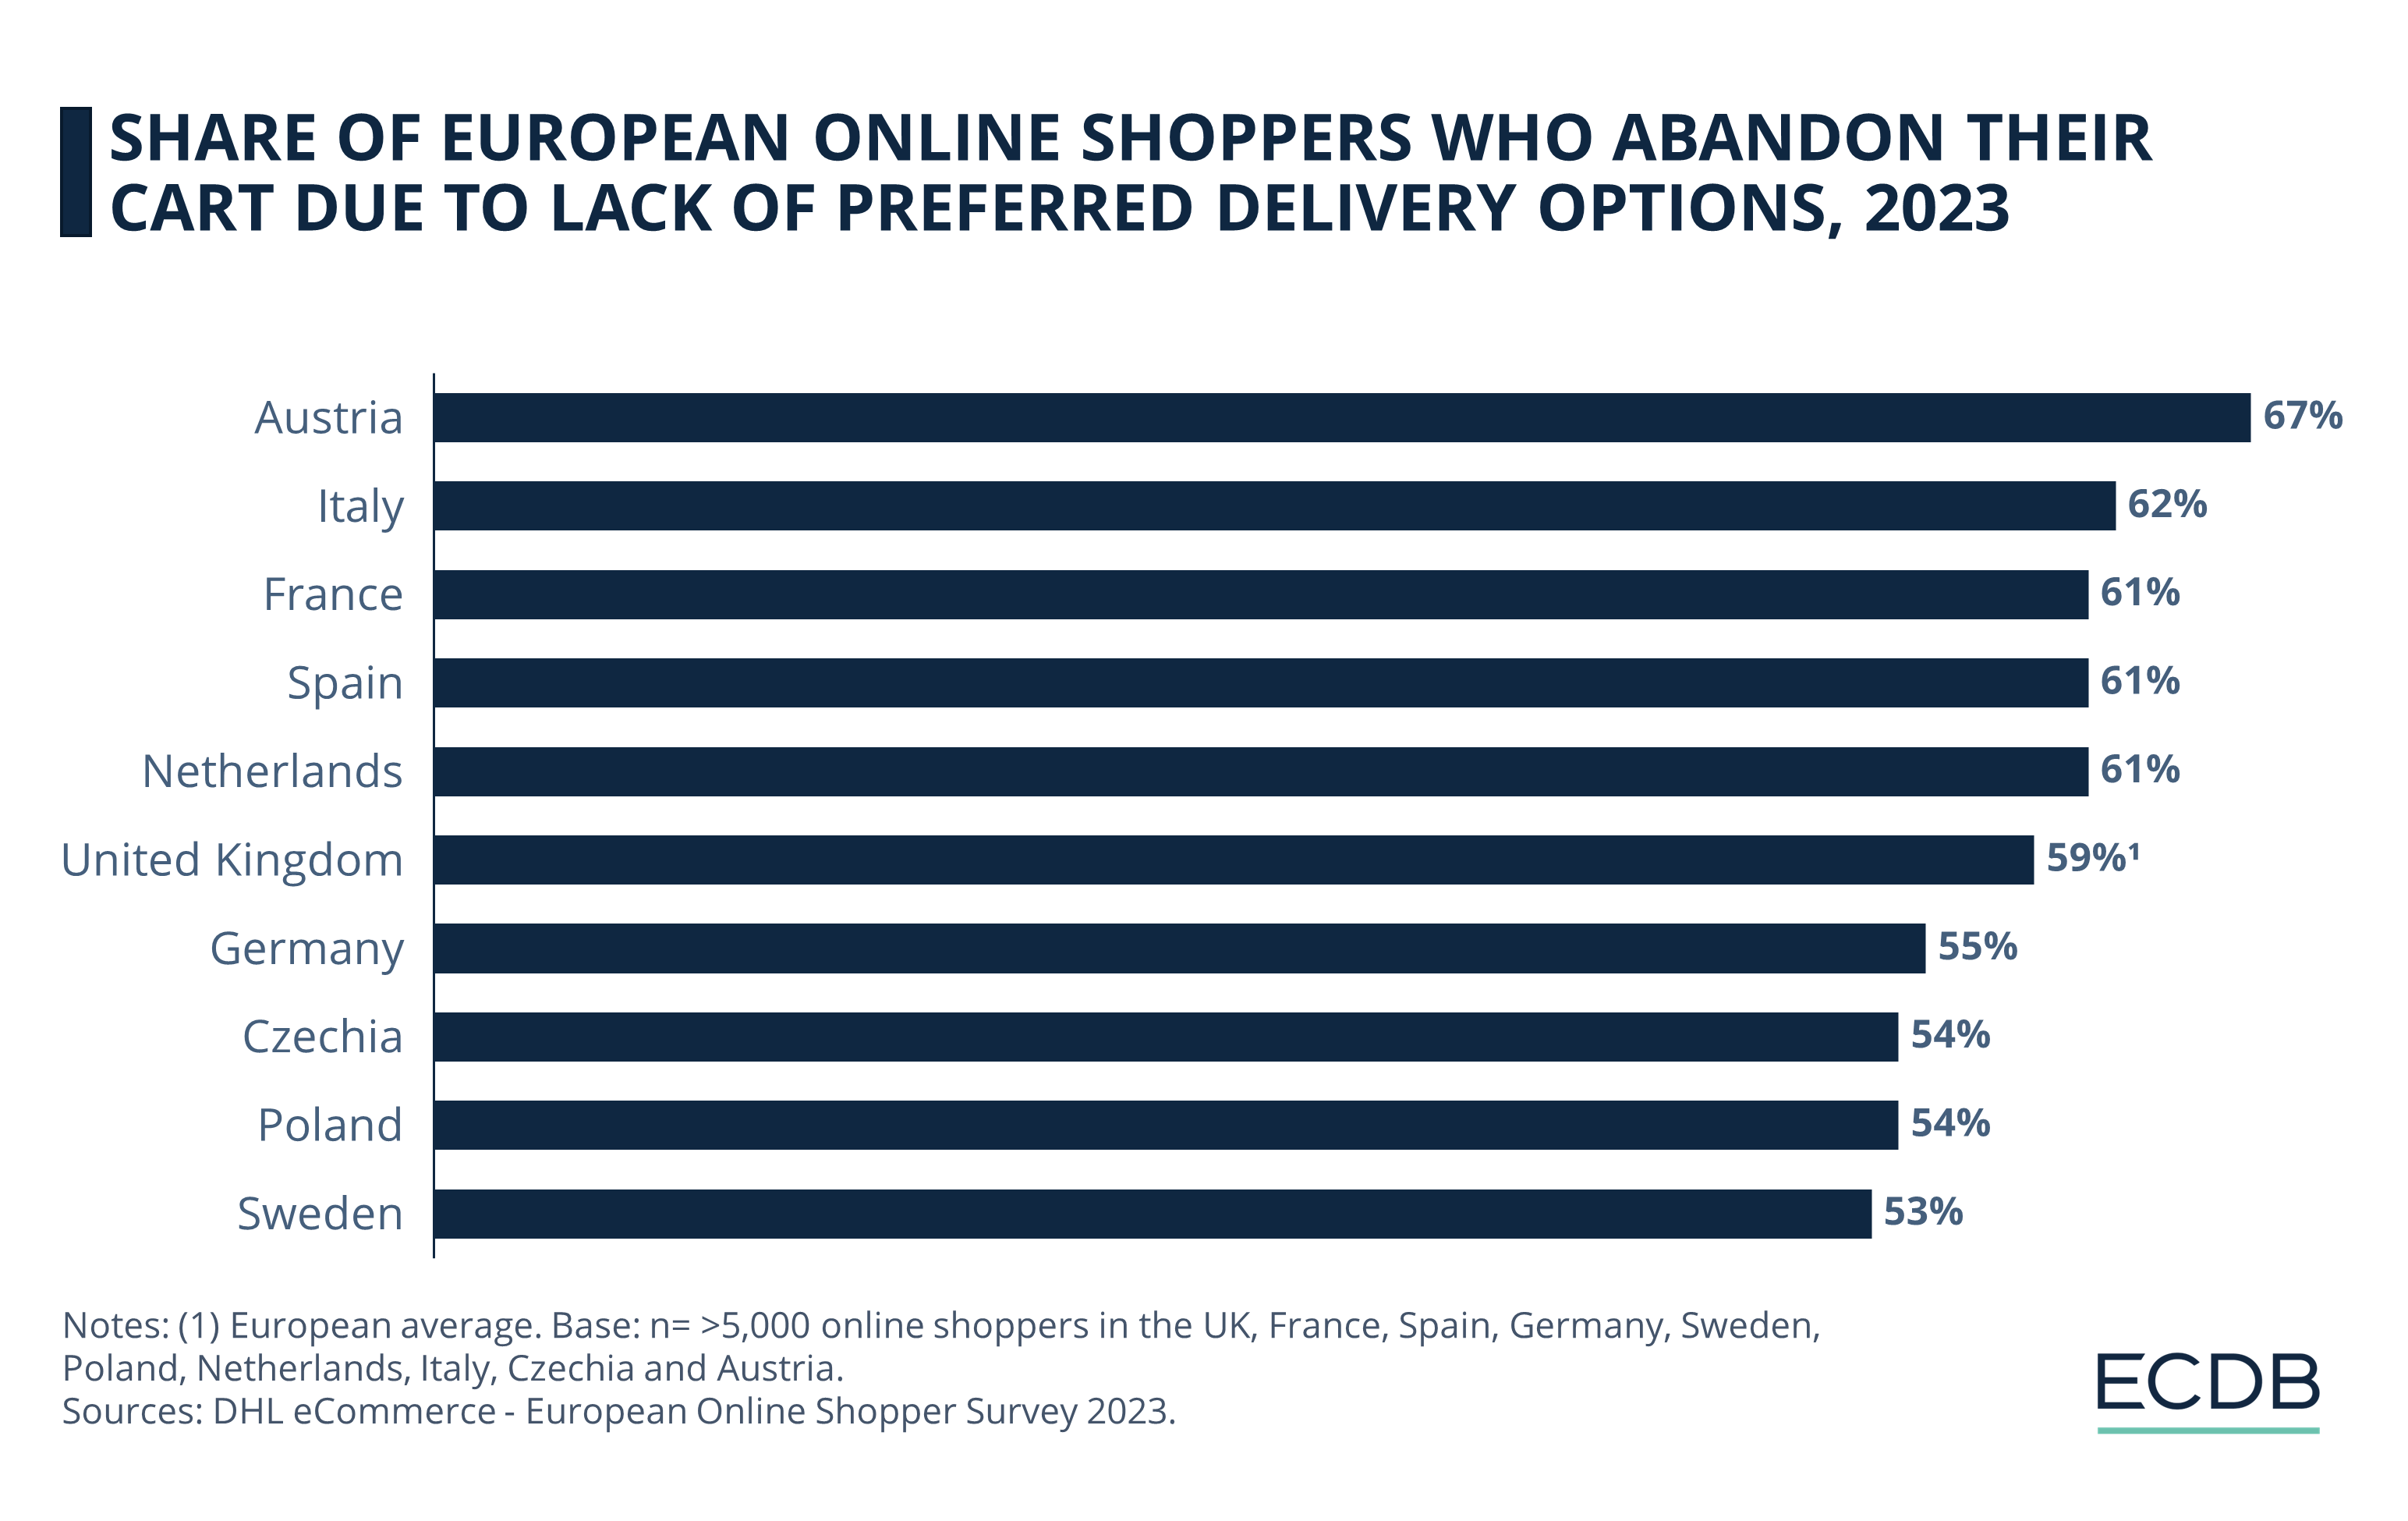 Share of European Online Shoppers Who Abandon Their Cart Due to Lack of Preferred Delivery Options, 2023